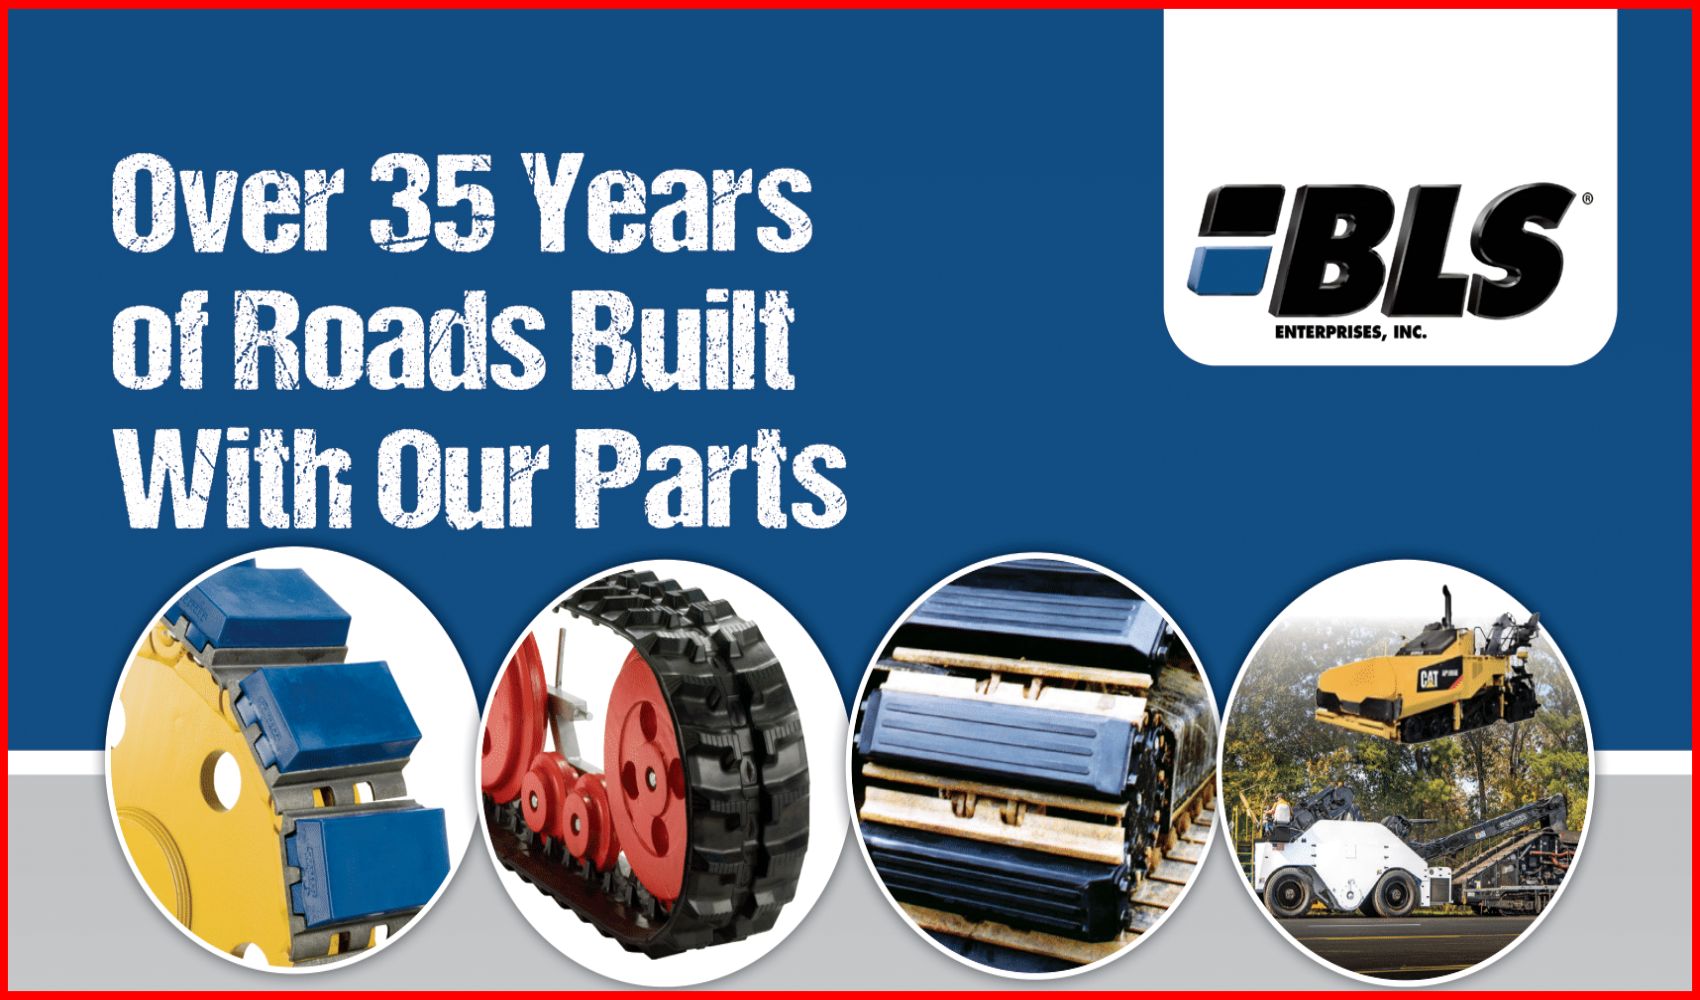 Over 35 Years of Roads Built With Our Parts